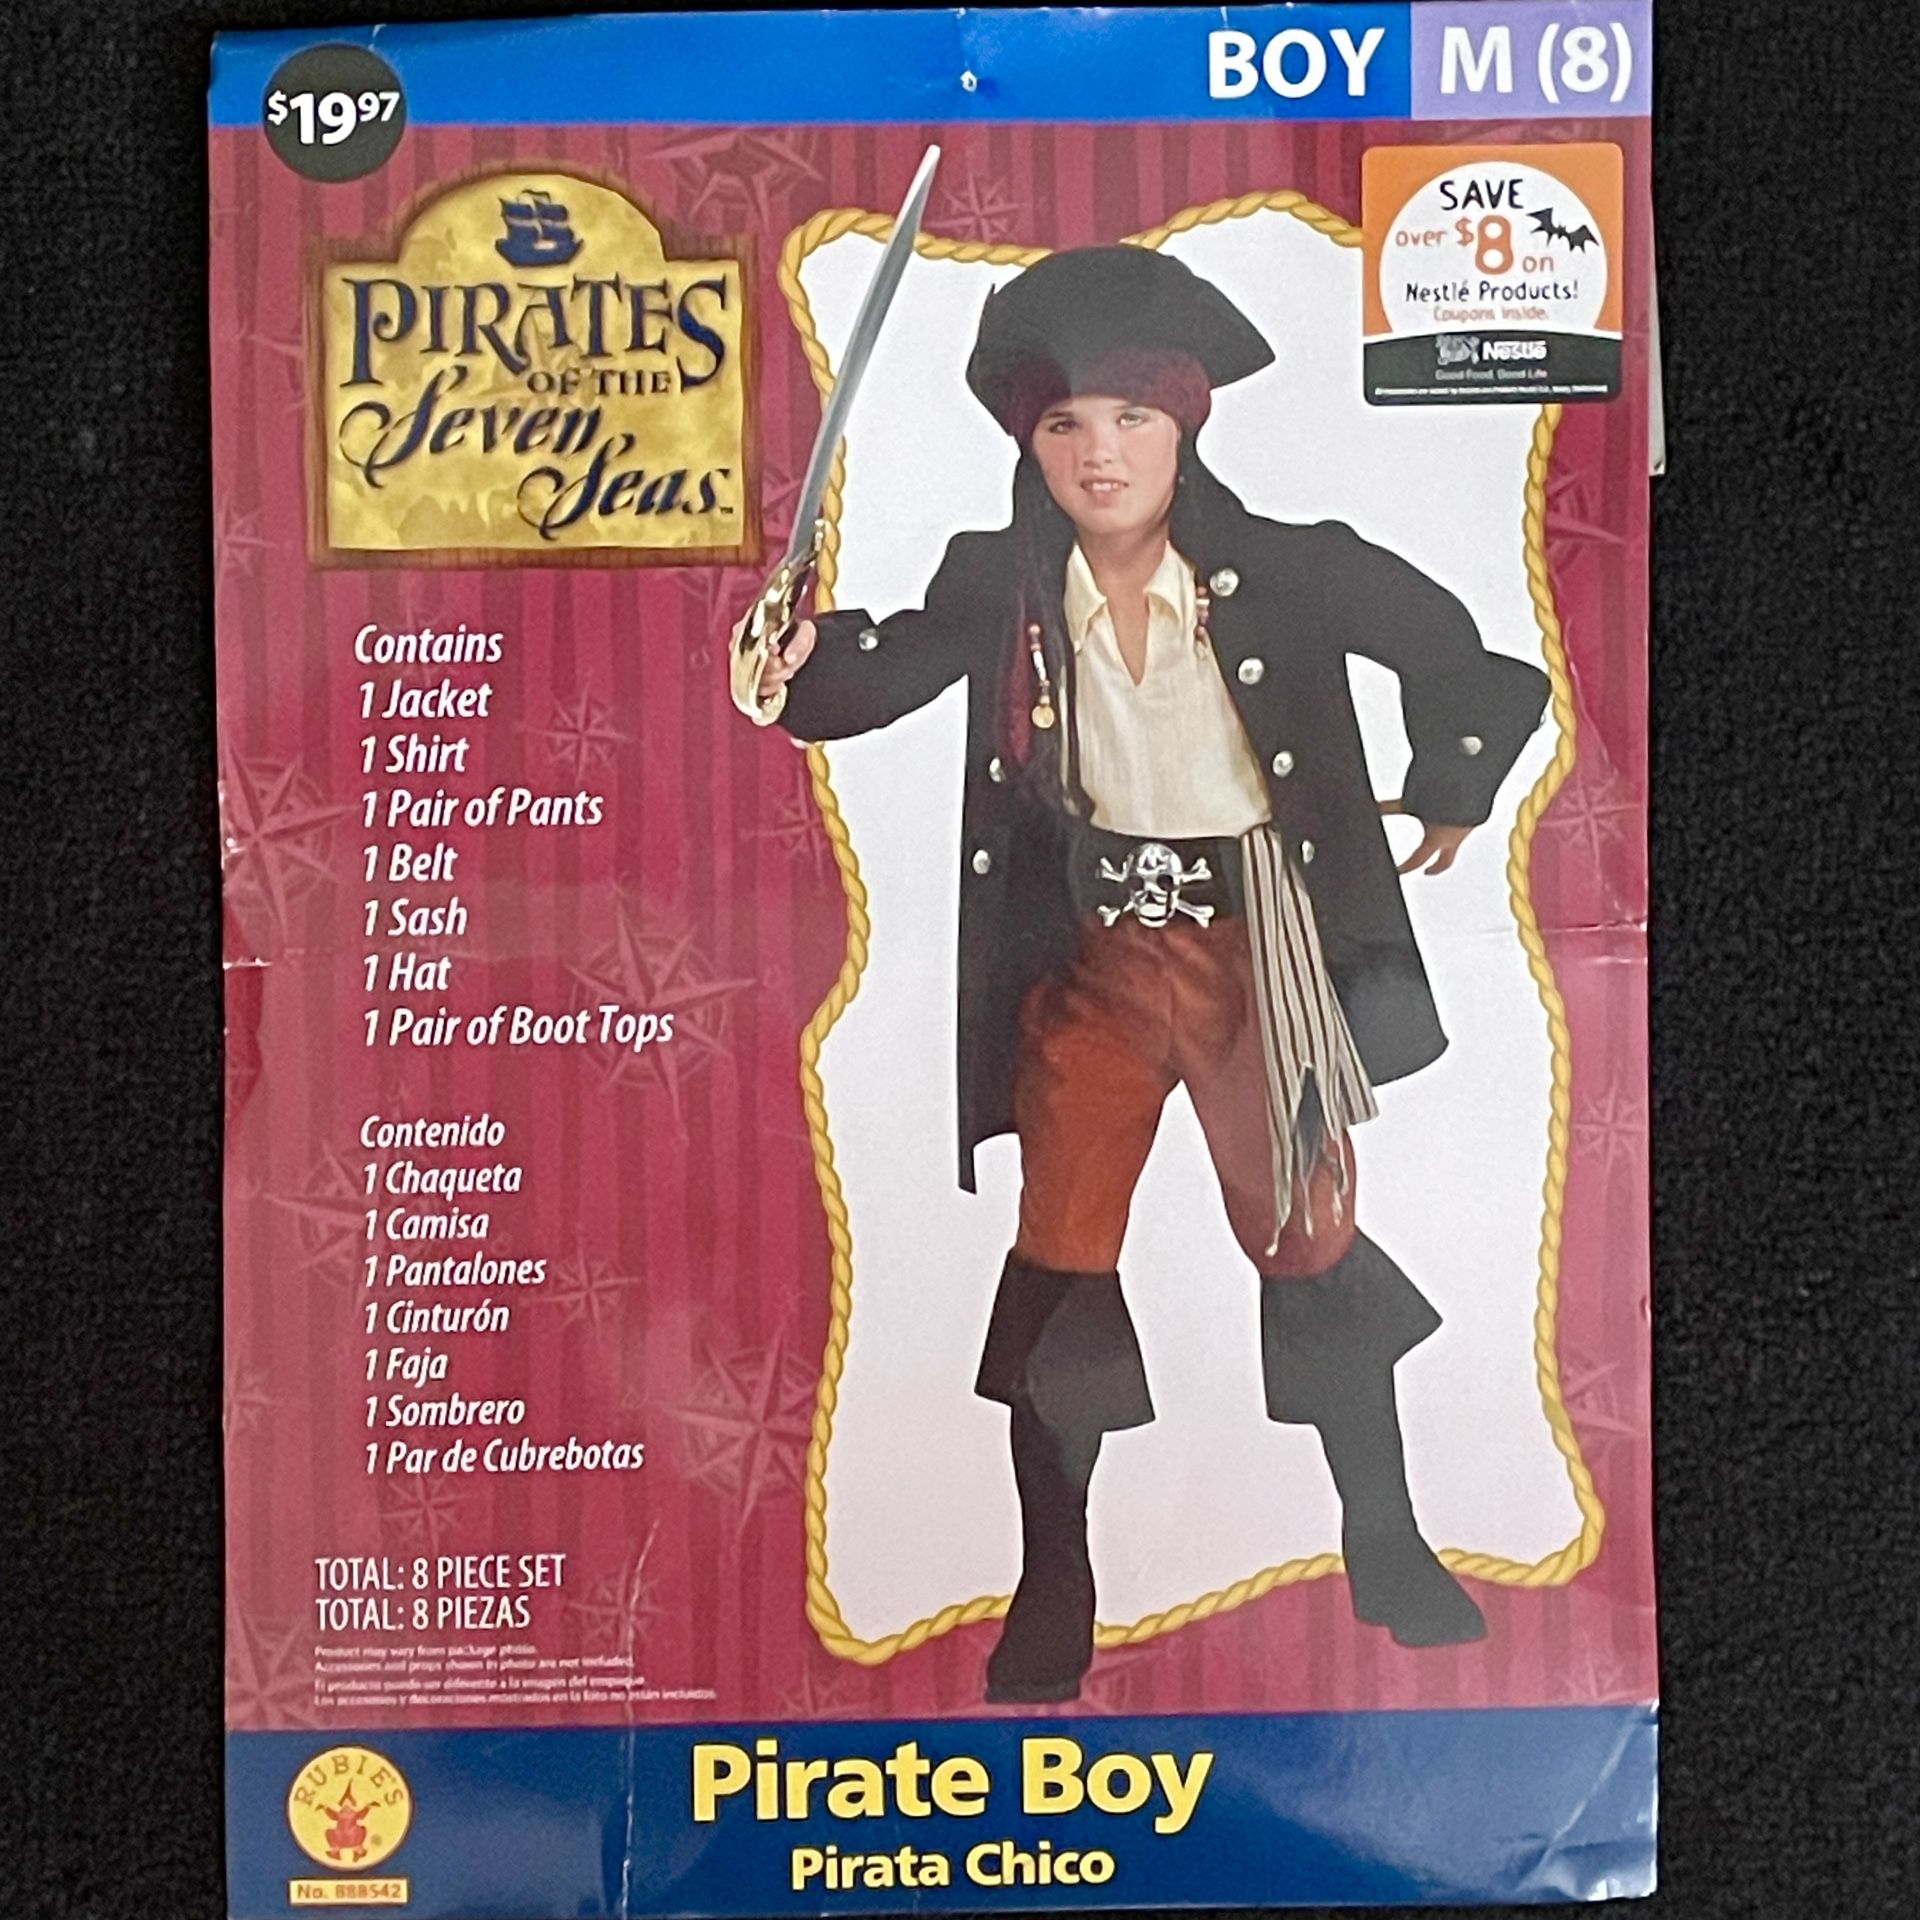 Pirates of the Seven Seas Boy Costume 8-years old. Like new condition. All pieces included. 